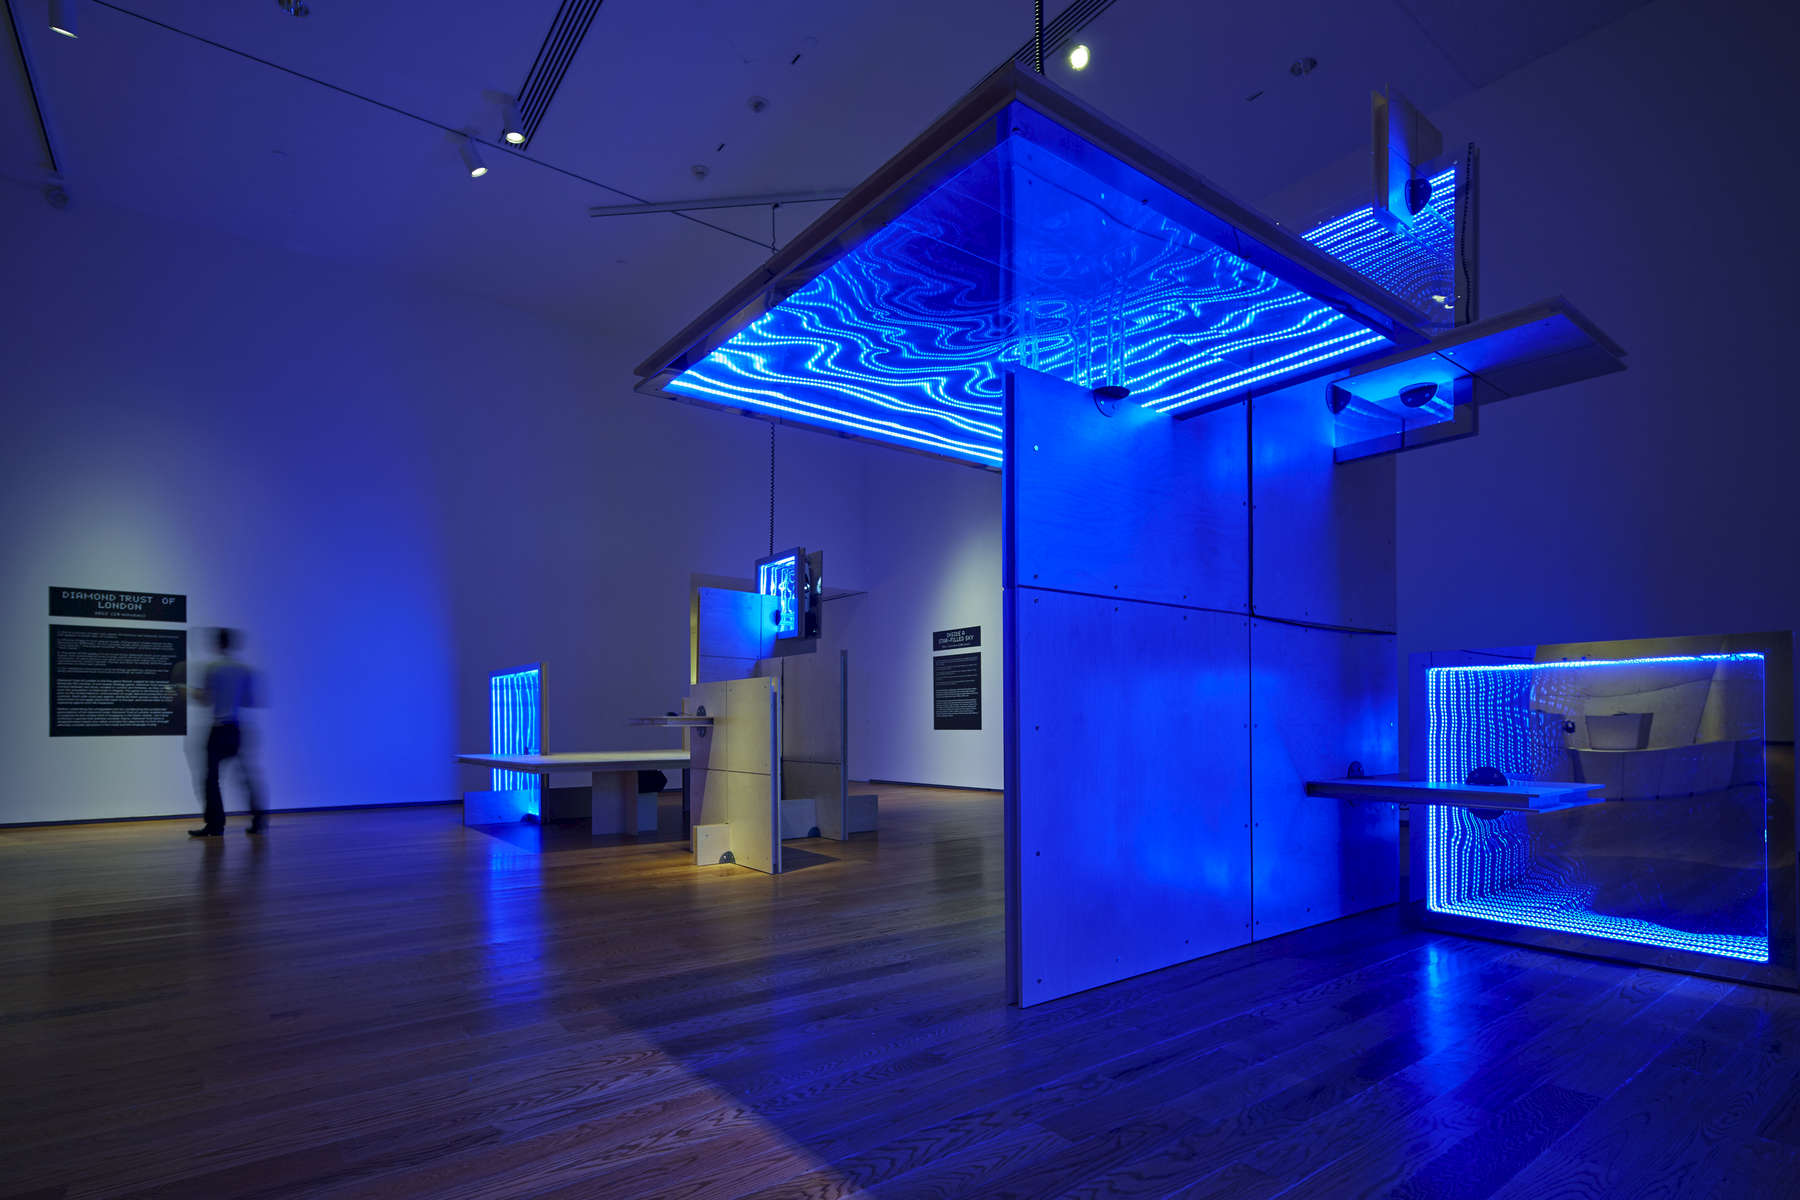 IKD was responsible for the installation and exhibition design of the first ever museum retrospective of a single video game designer. The exhibition, The Game Worlds of Jason Rohrer at the Davis Museum at Wellesley College, is a survey of the independent game designer Jason Rohrer work which has formed part of the Museum of Modern Art’s initial video game acquisition.The central theme examines where video games are positioned within our daily culture and questions whether or not video games are art. The space is designed around four large installations that both create immersive environments to enhance game-play and form an interpretation of the games themselves. It also challenges the traditional notion that exhibition design should sit quietly behind the exhibited work. While the design is centered on creating a focus on exhibited works The Games Worlds of Jason Rohrer explores new possibilities in exhibition design through the immersive installation environments. image by Ben KouTo see a panoramic click here